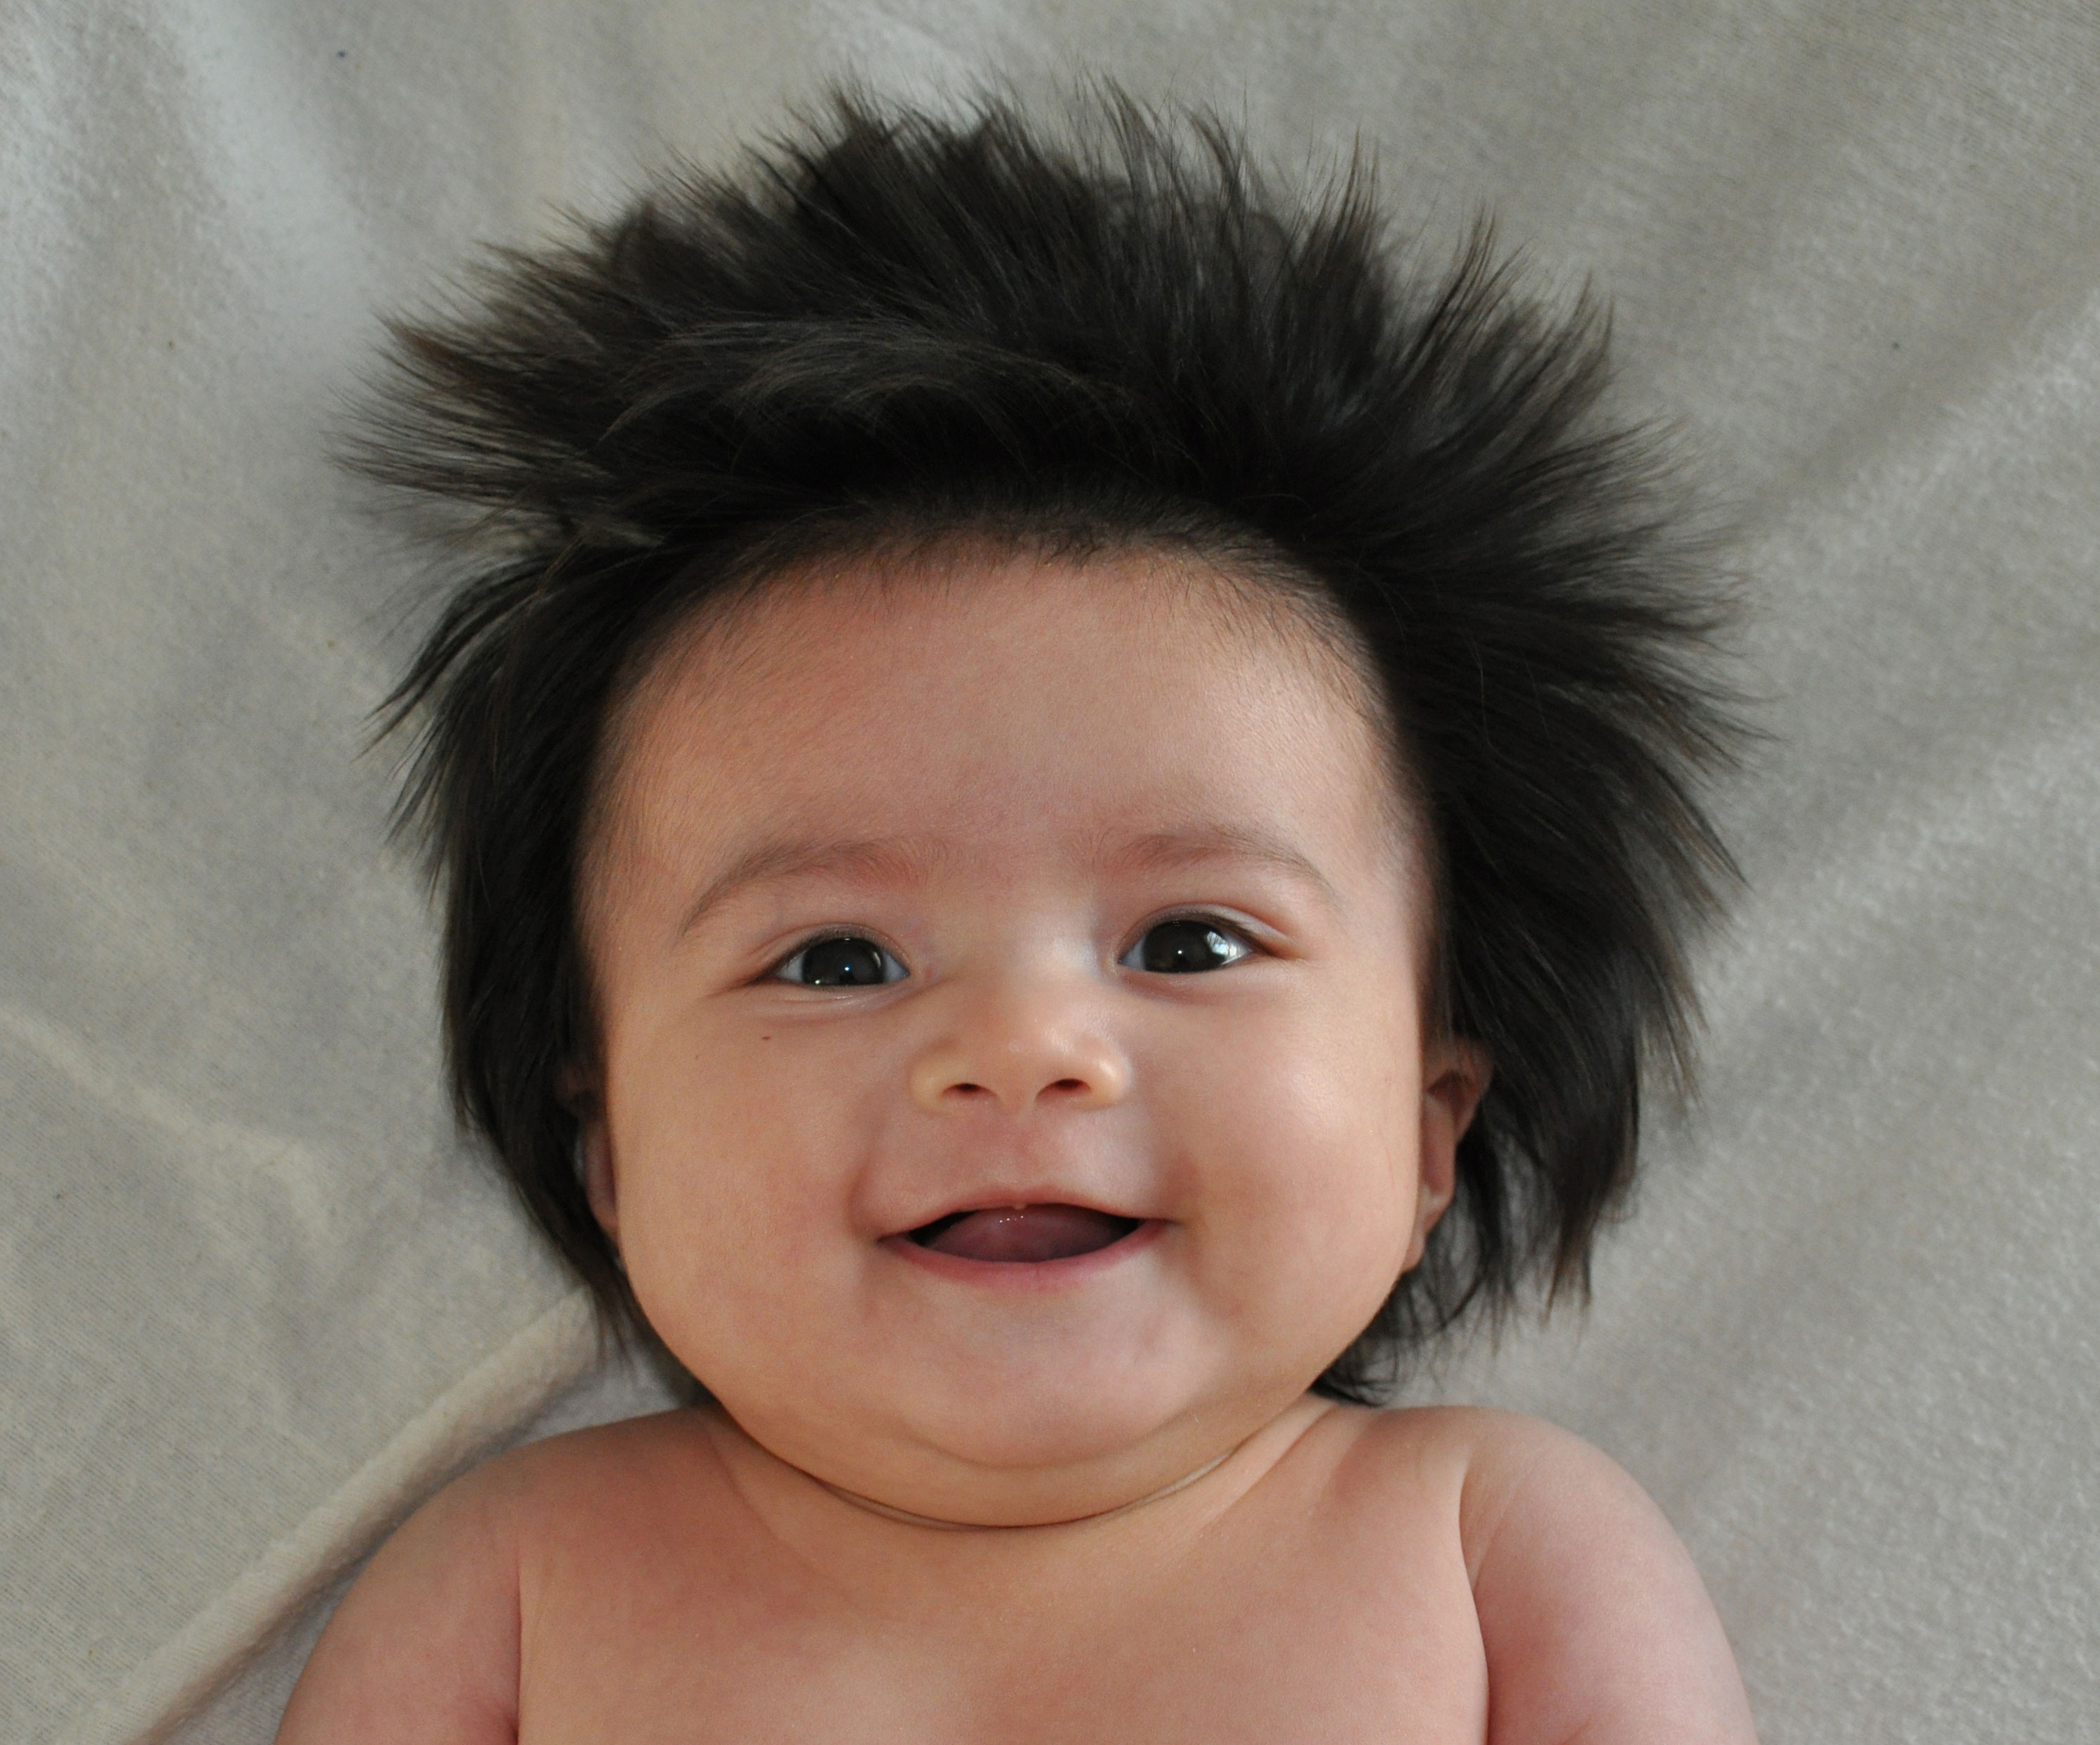 Rough Day? These 12 Adorable Baby Photos Will Cheer You Up!